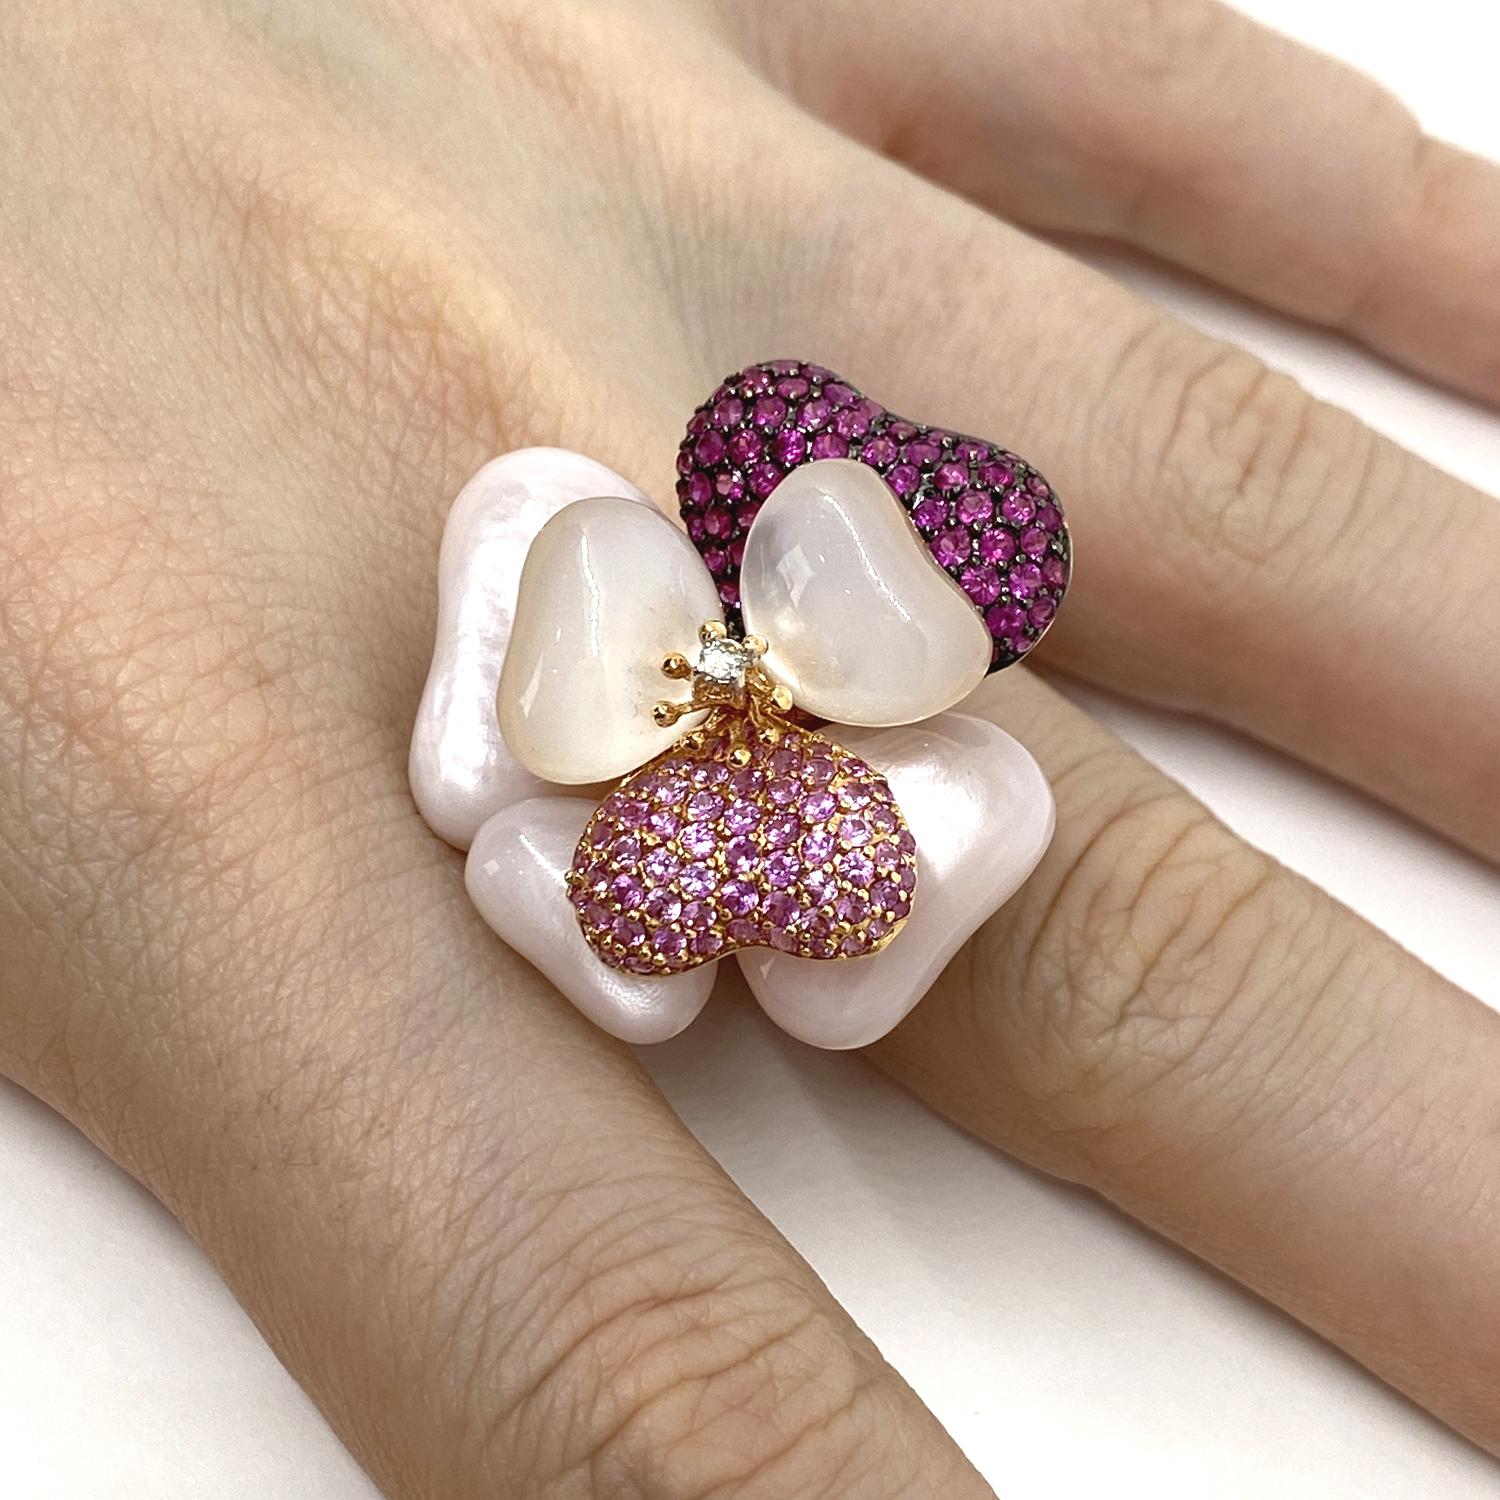 Flower theme ring made of 18 kt rose gold .with mother-of-pearl petals and pavé brilliant-cut pink sapphires for ct.0.92 and pavé rubies for ct.1.53 and central natural diamond for ct.0.04
-------------------------------------------------

Important